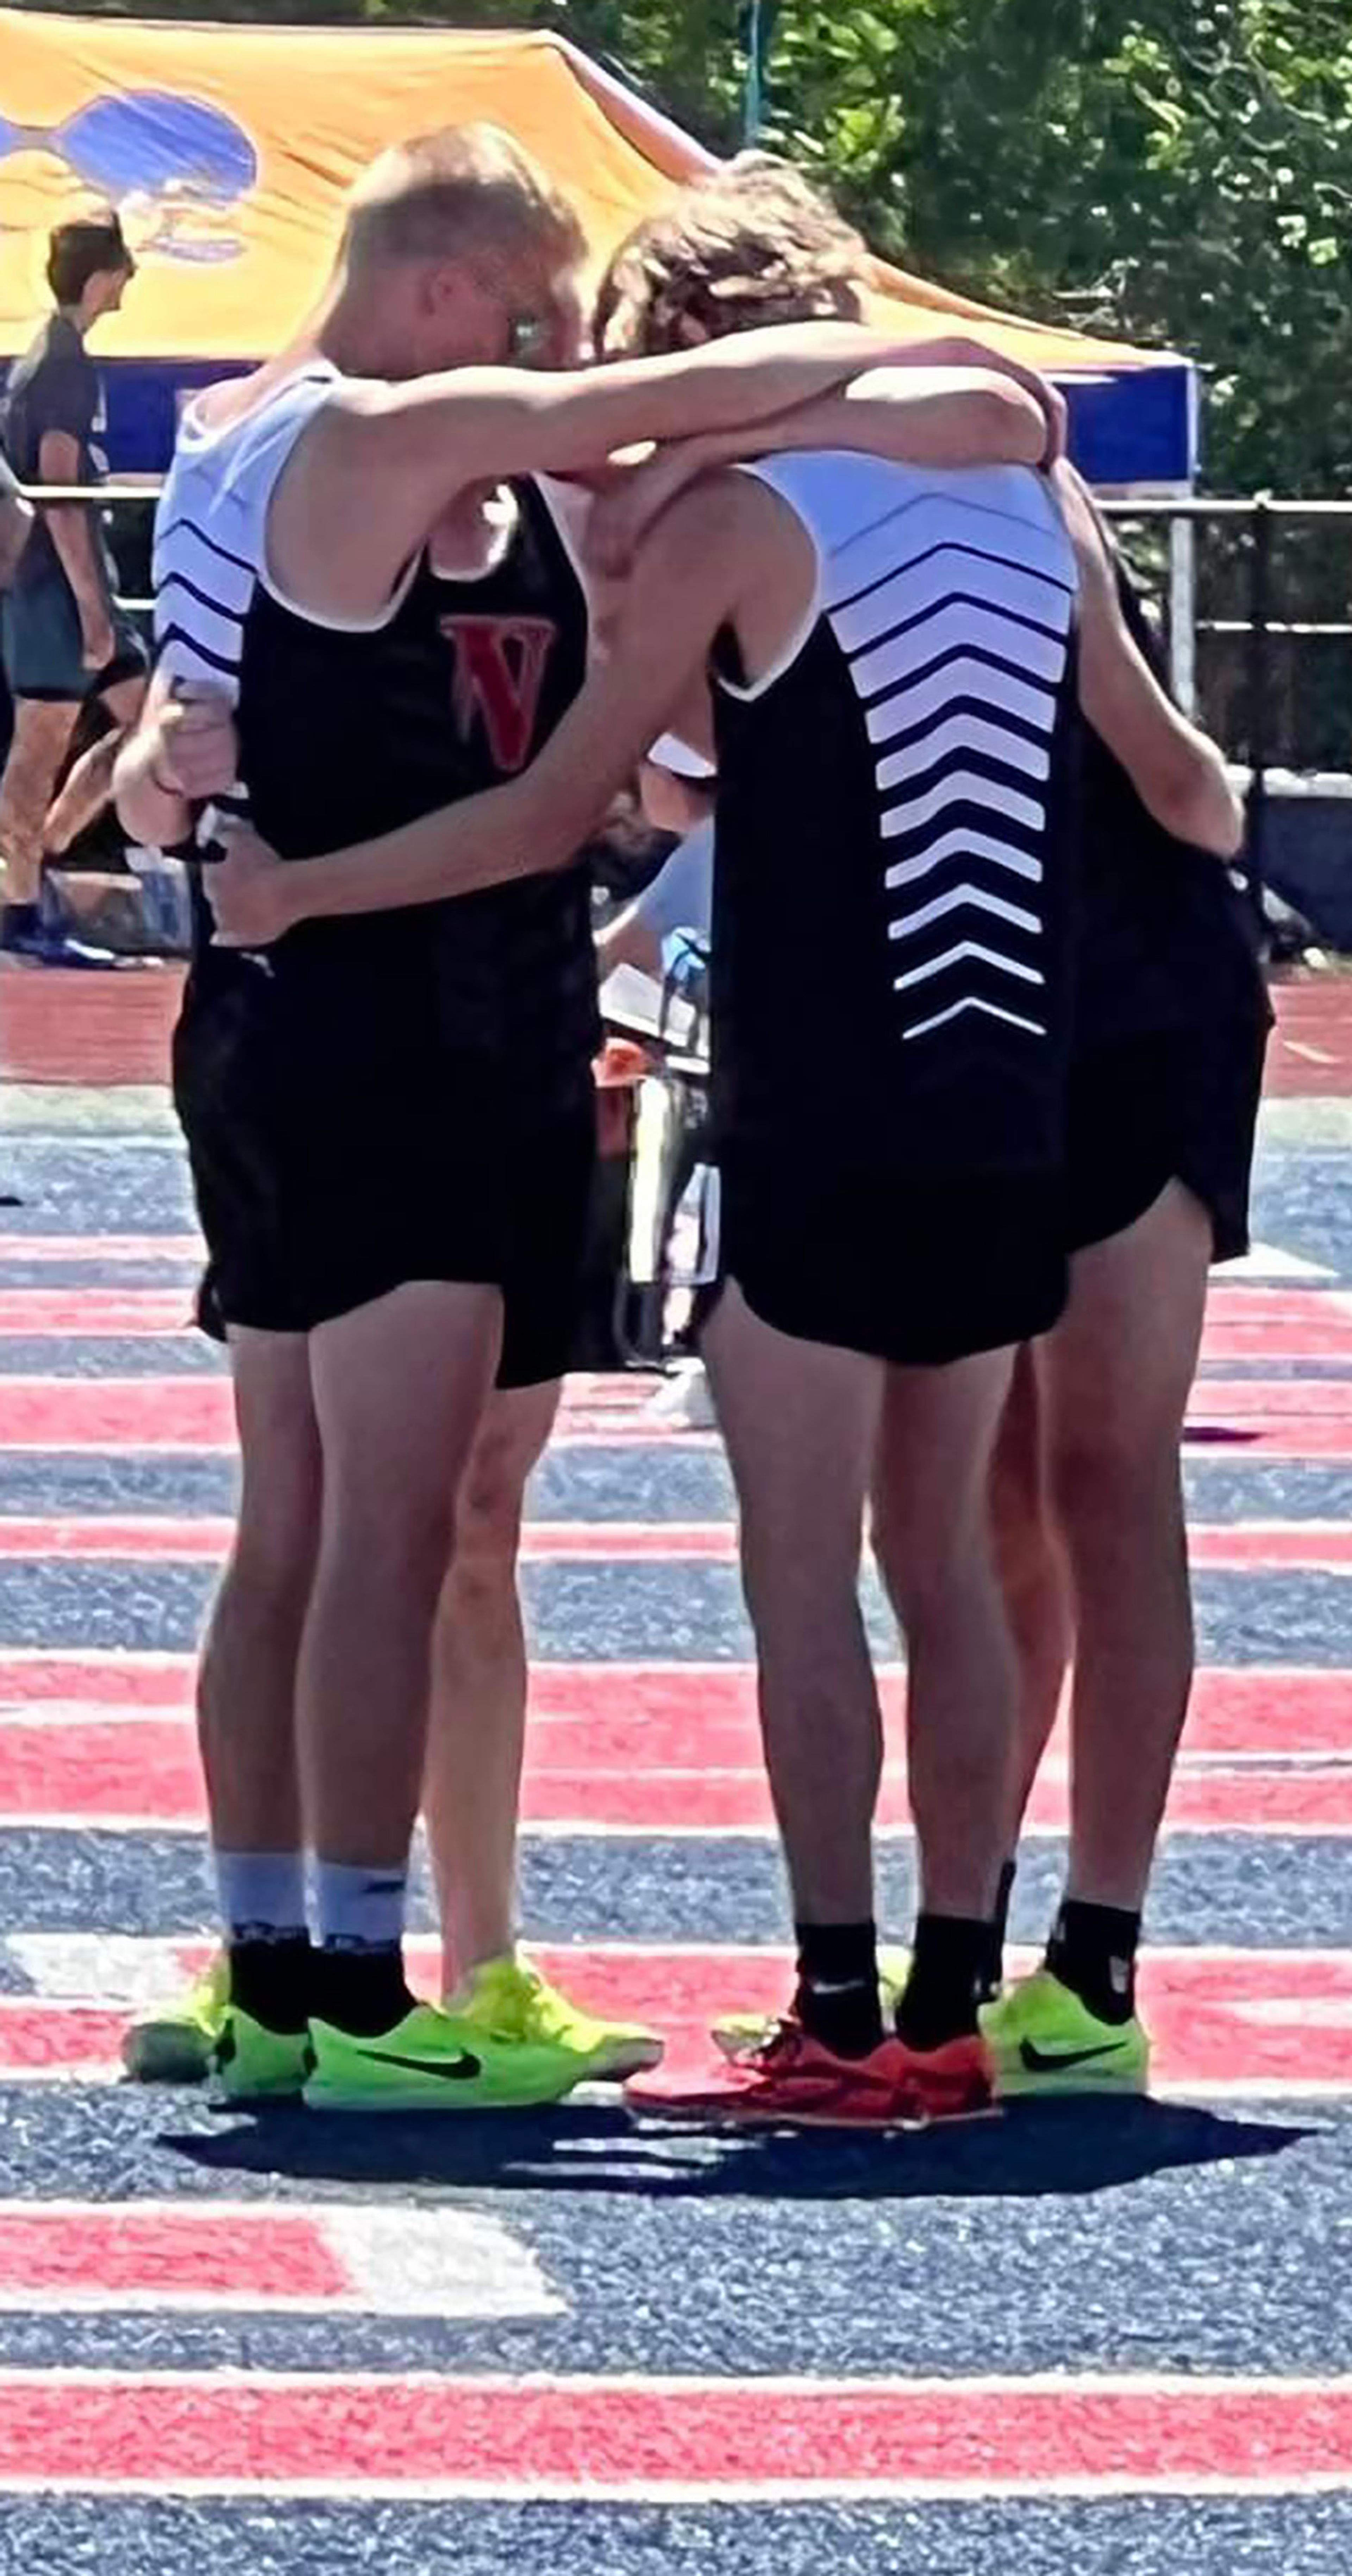 The boys 4x800 relay members circle up for their pre-race prayer.